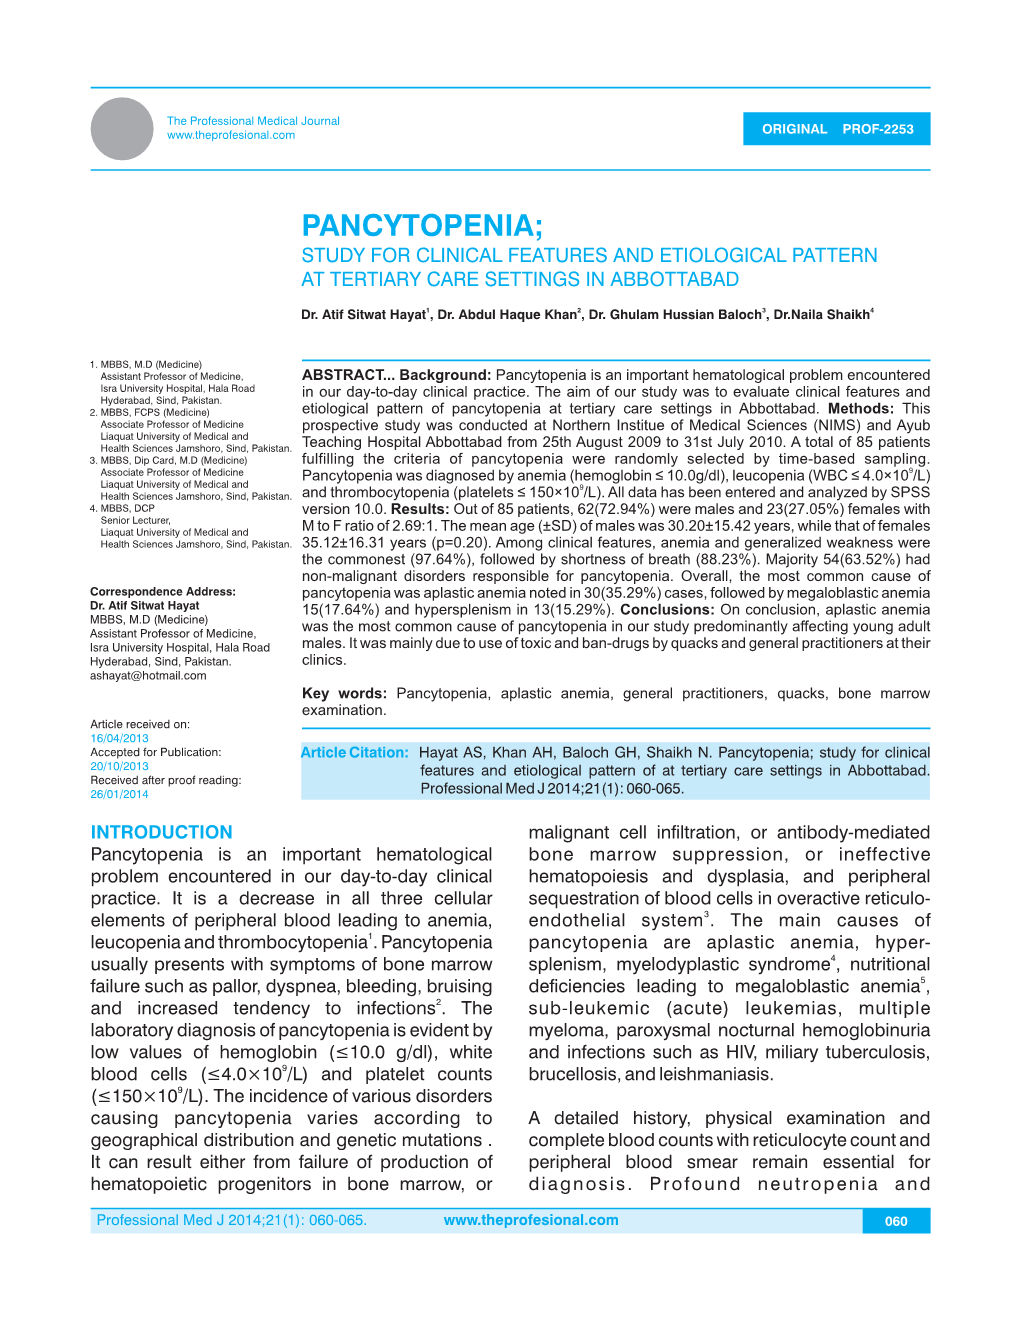 Pancytopenia; Study for Clinical Features and Etiological Pattern at Tertiary Care Settings in Abbottabad